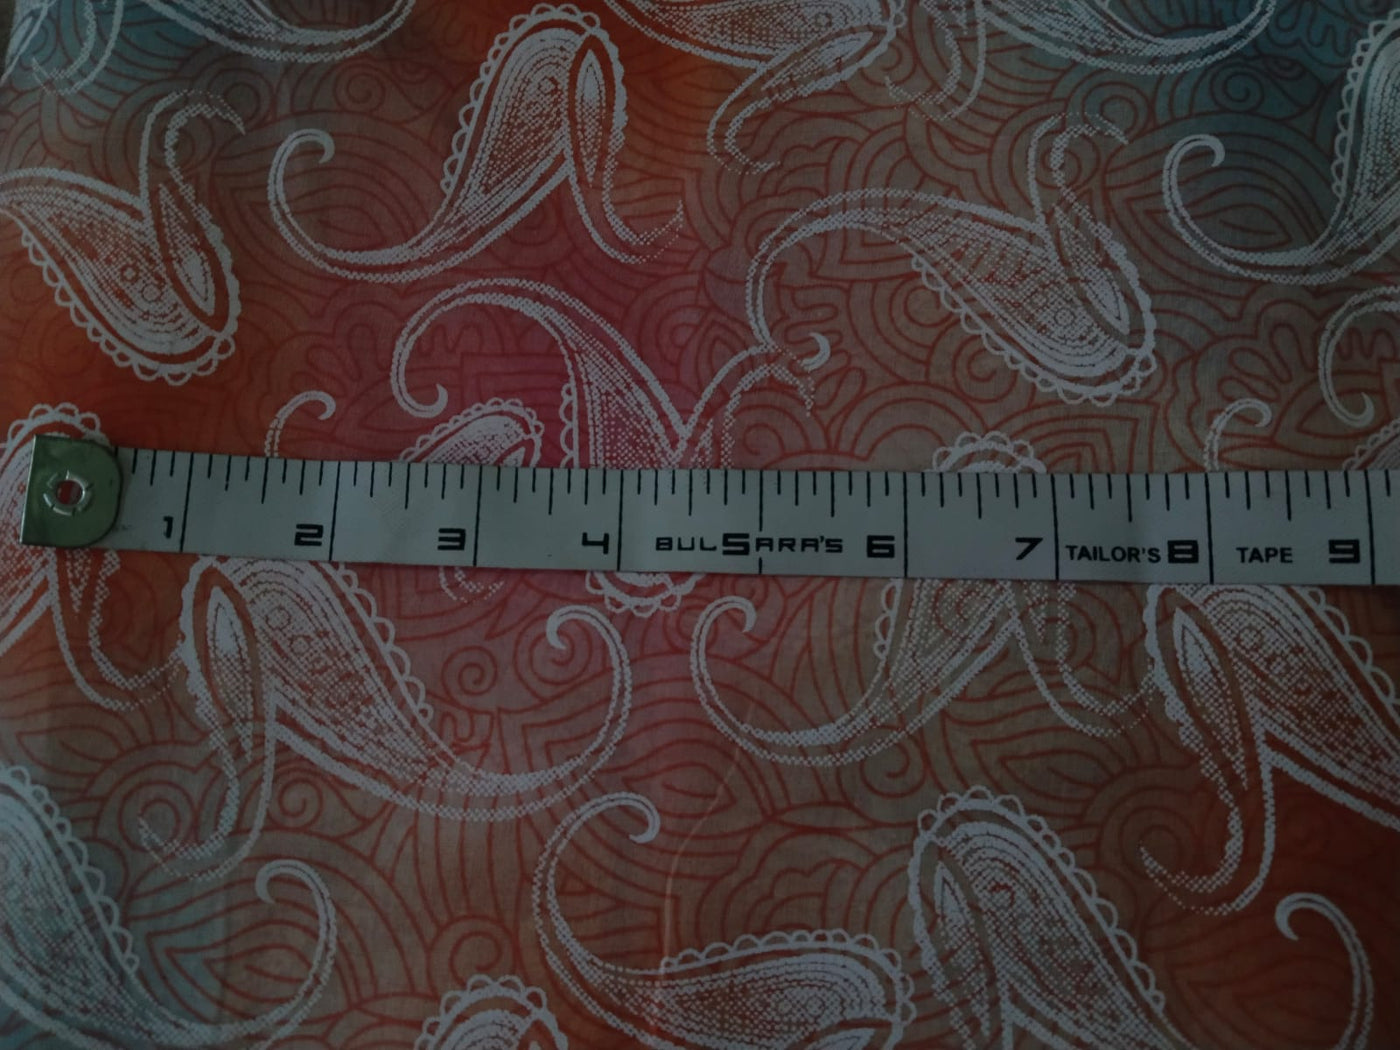 Cotton organdy printed 44" available in 2 designs [shaded paisleys pinks orange blue pink floral][15559/60]